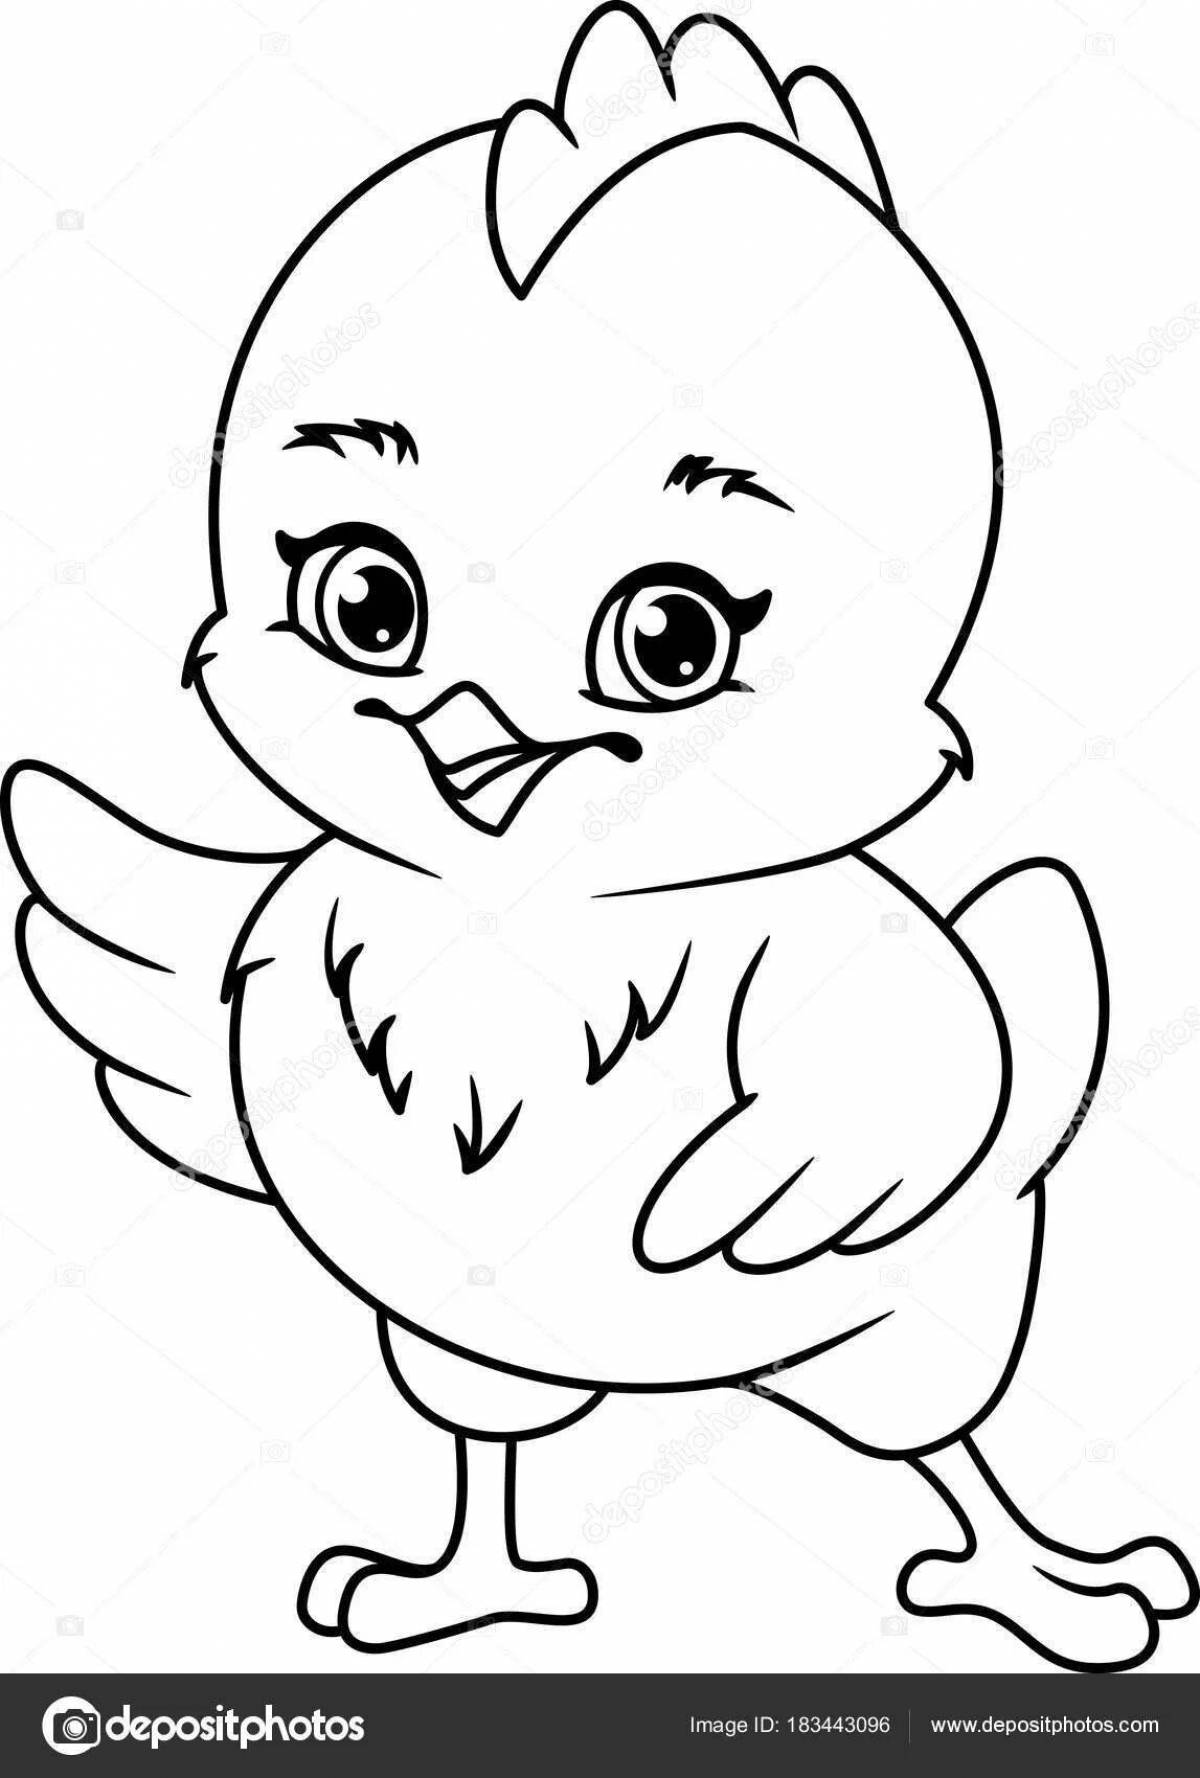 Adorable chick coloring book